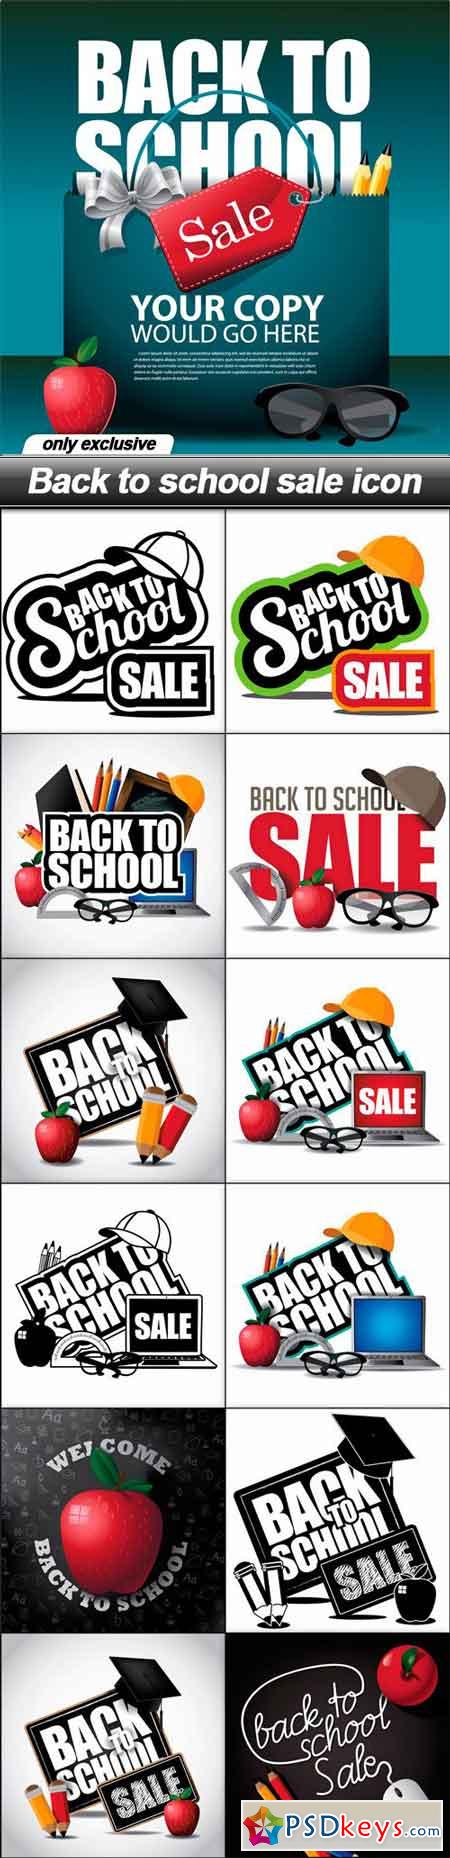 Back to school sale icon - 13 EPS